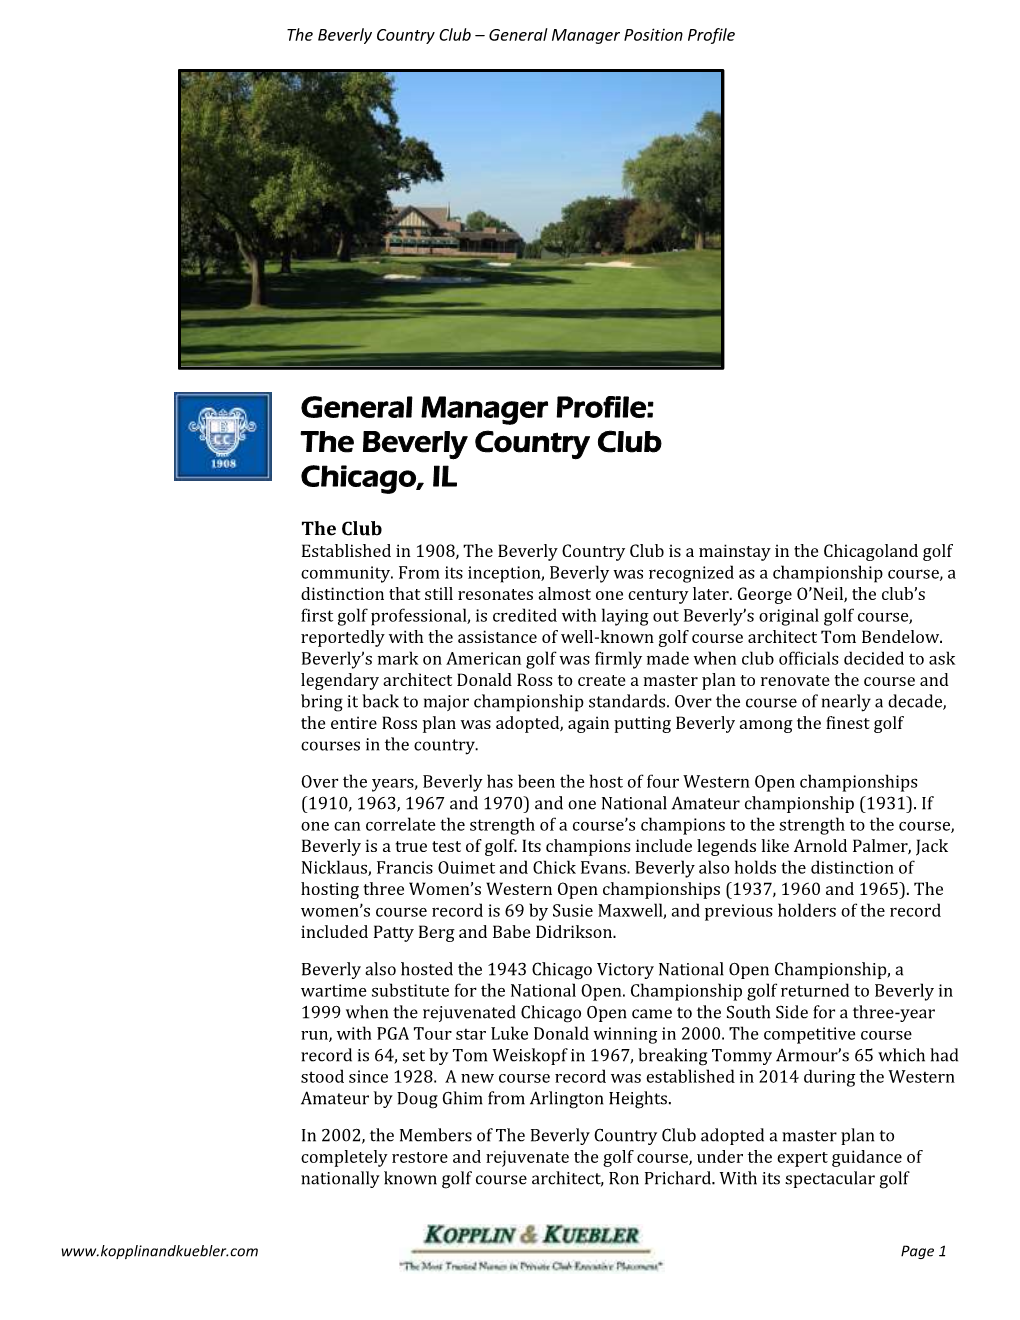 General Manager Profile: the Beverly Country Club Chicago, IL